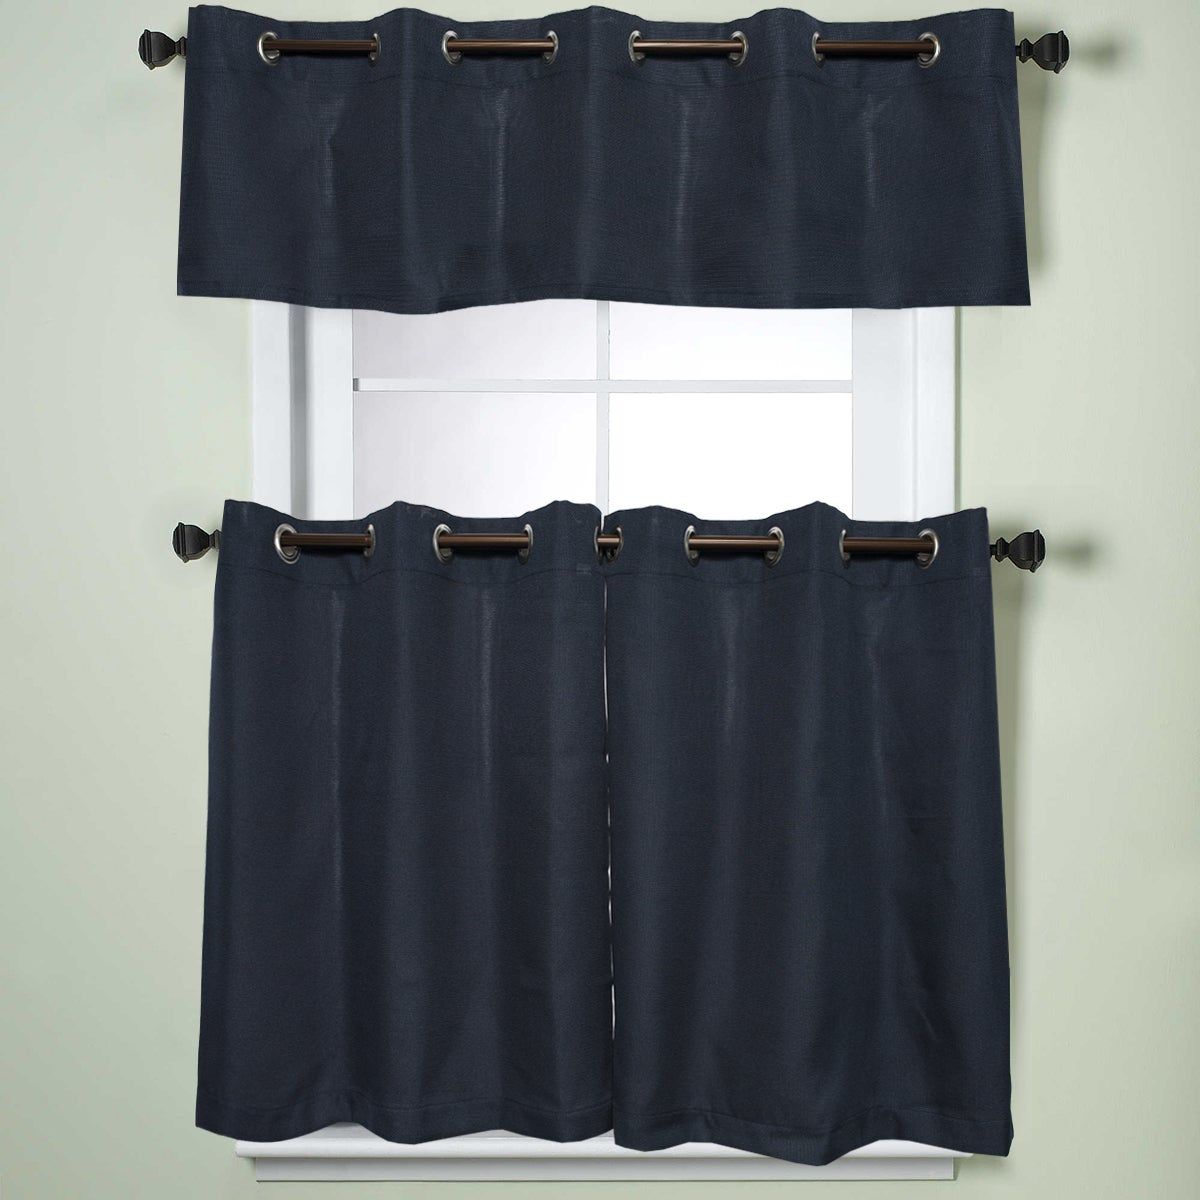 Modern Subtle Texture Solid Navy Kitchen Curtain Parts With Grommets  Tier  And Valance Options Throughout Modern Subtle Texture Solid Red Kitchen Curtains (View 5 of 20)